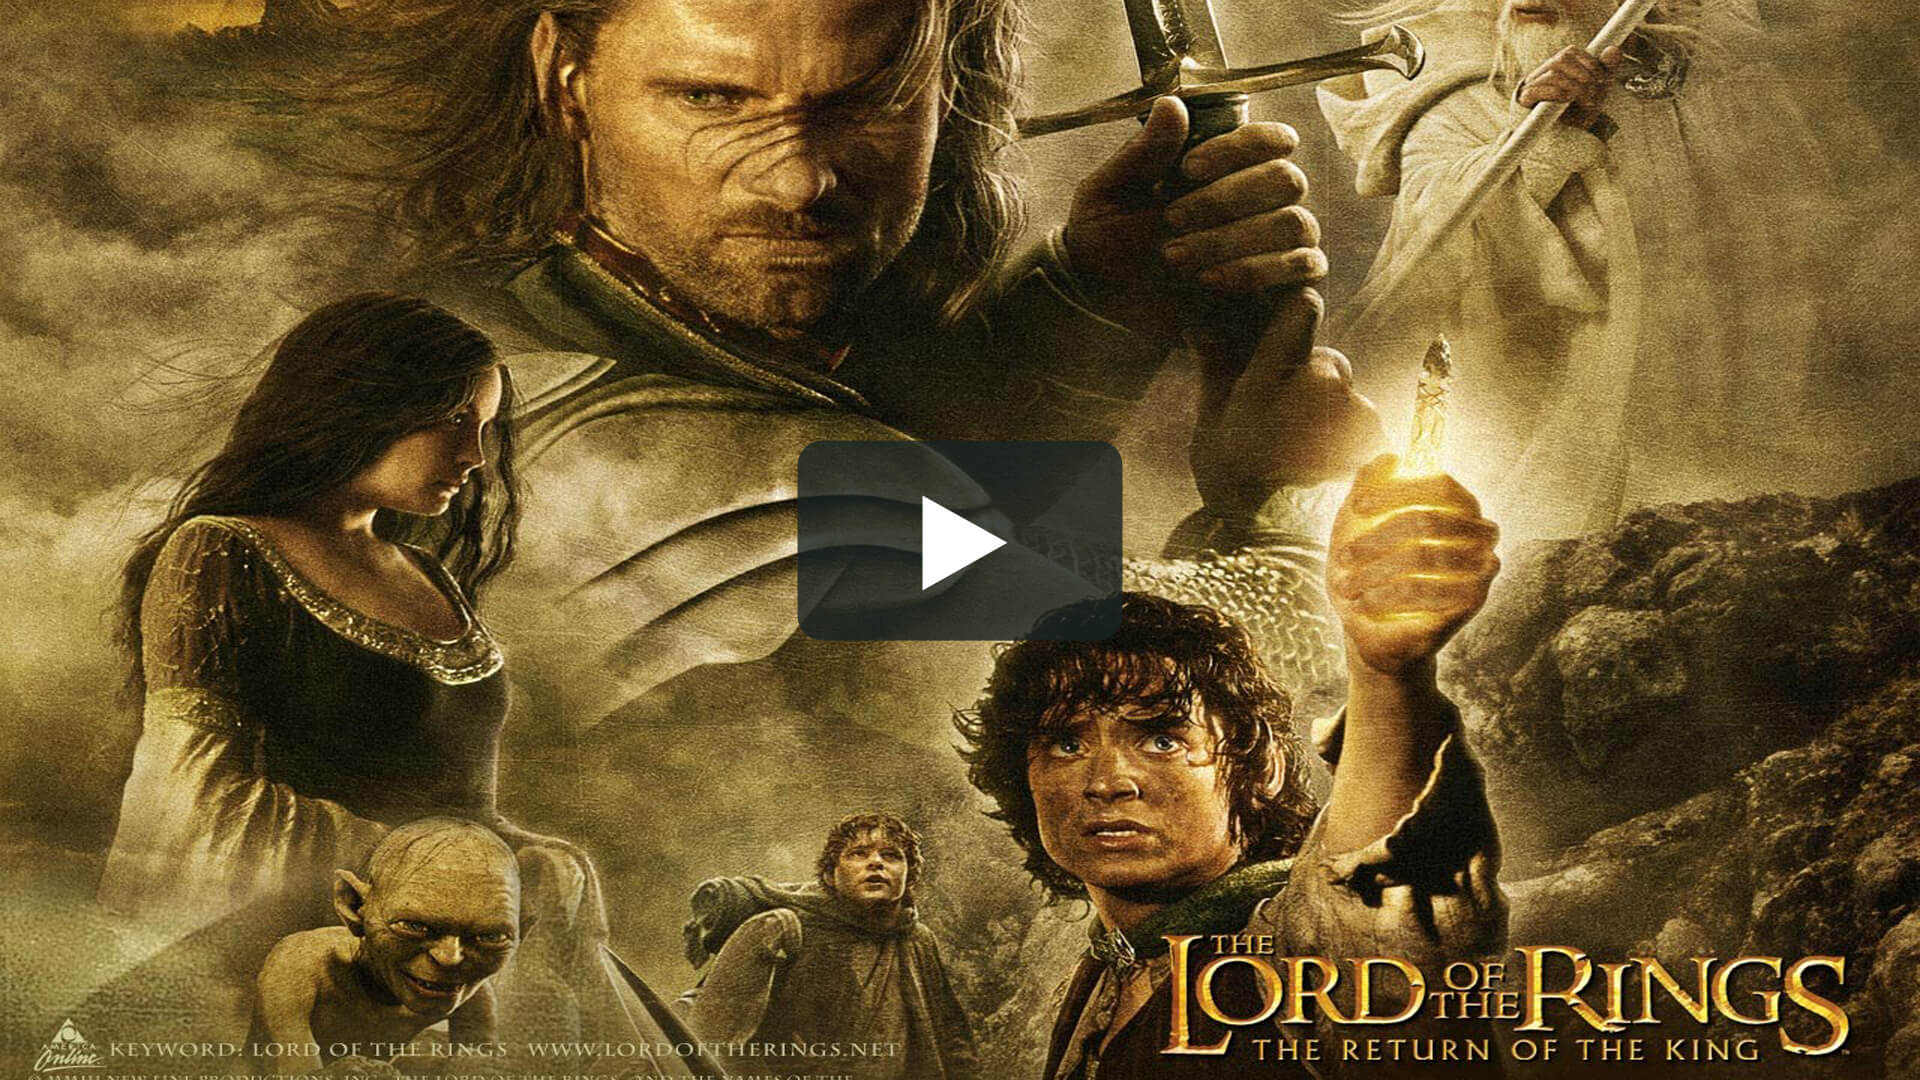 The Lord of the Rings: The Return of the King - 指環王3：王者無敵